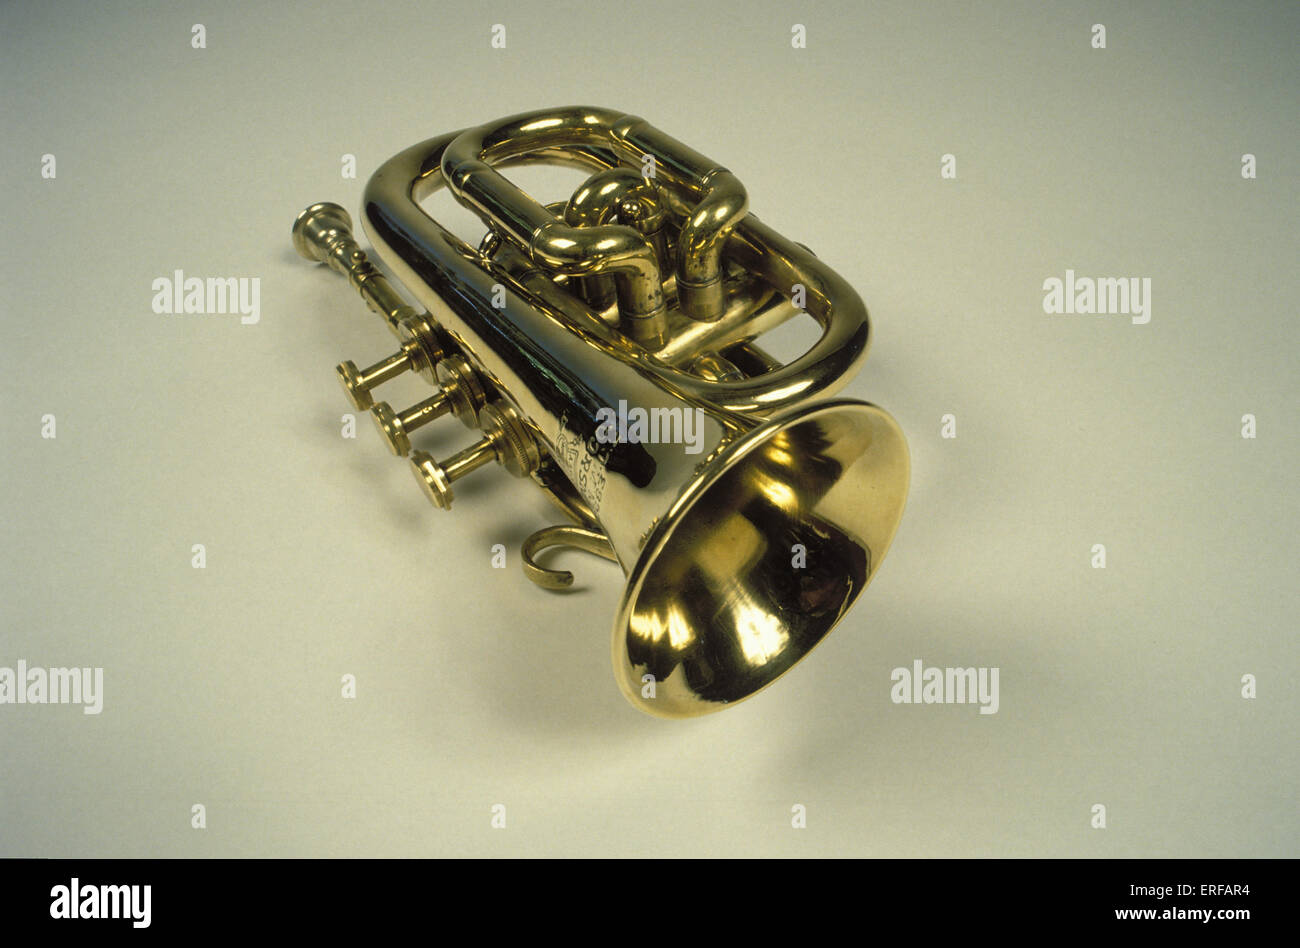 Pocket Cornet by Bessons on white background. Stock Photo